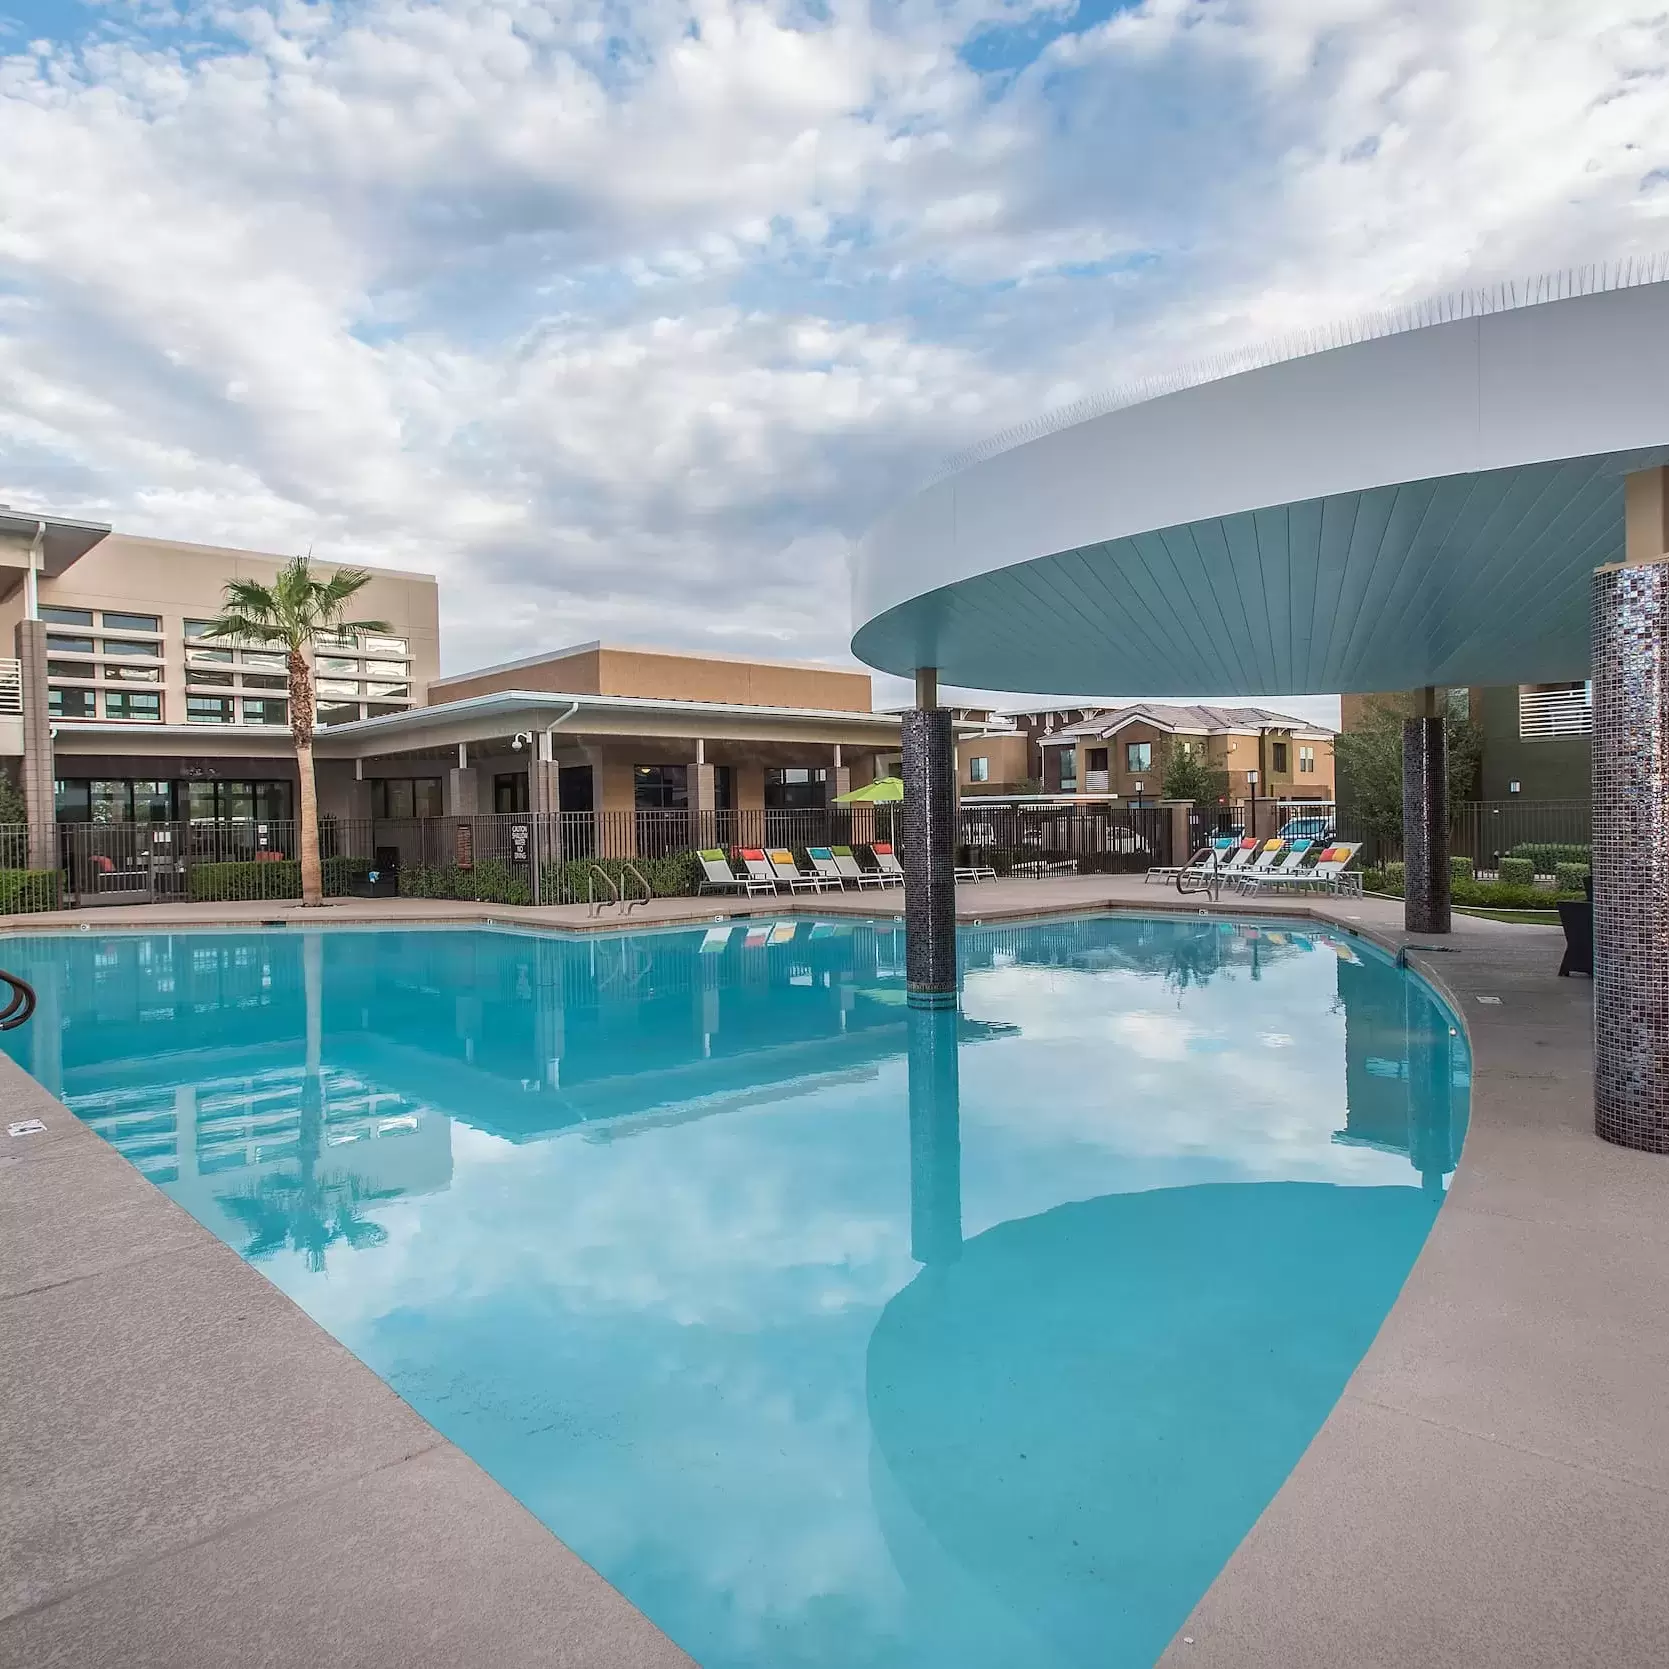 The pool and patio for the Liv Northgate community.